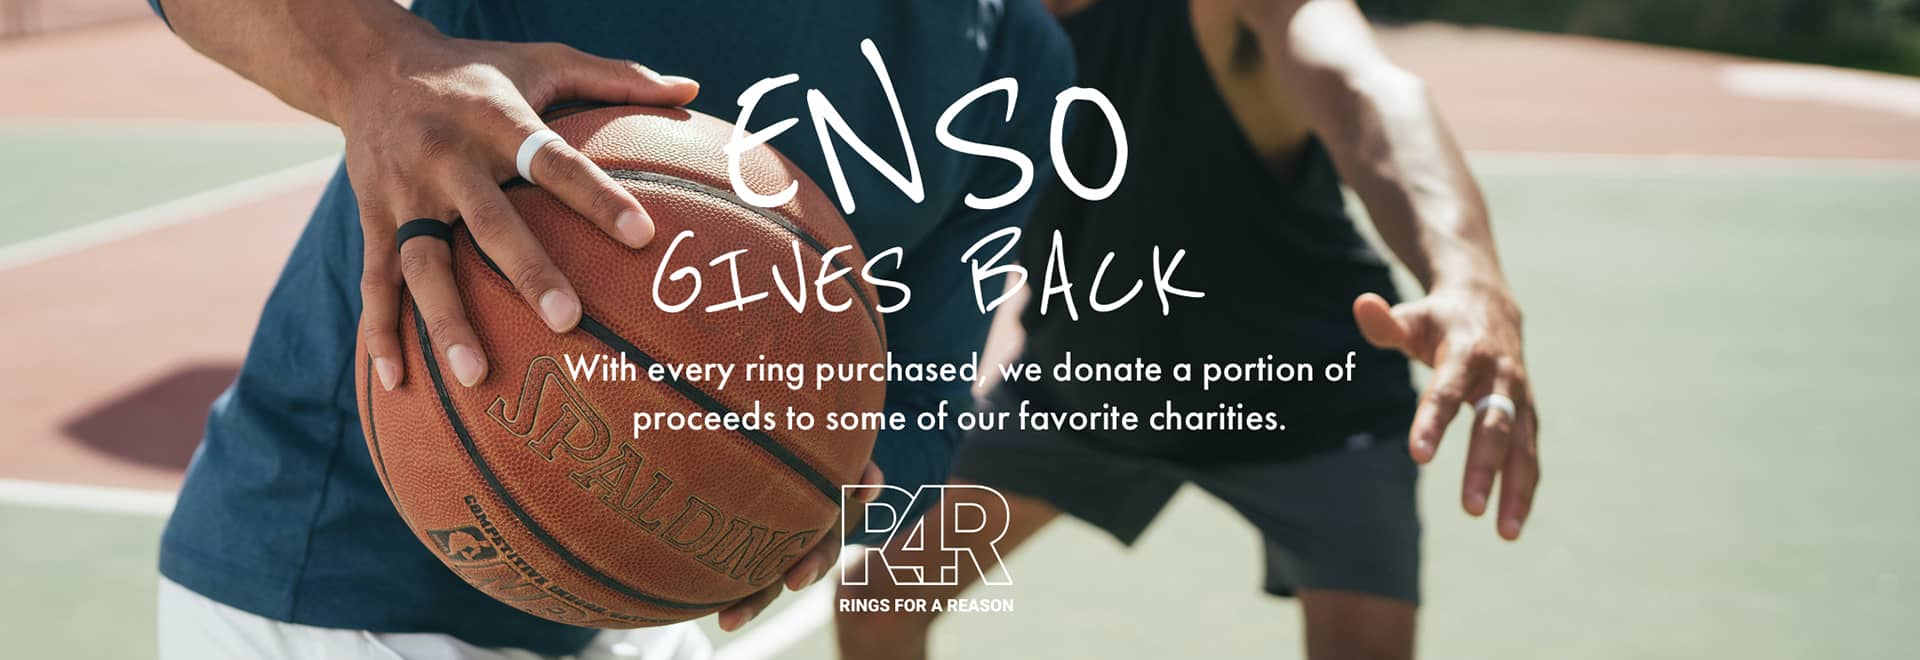 Enso gives back | With every ring purchase, we donate a portion of the proceeds to some of our favorite charities.